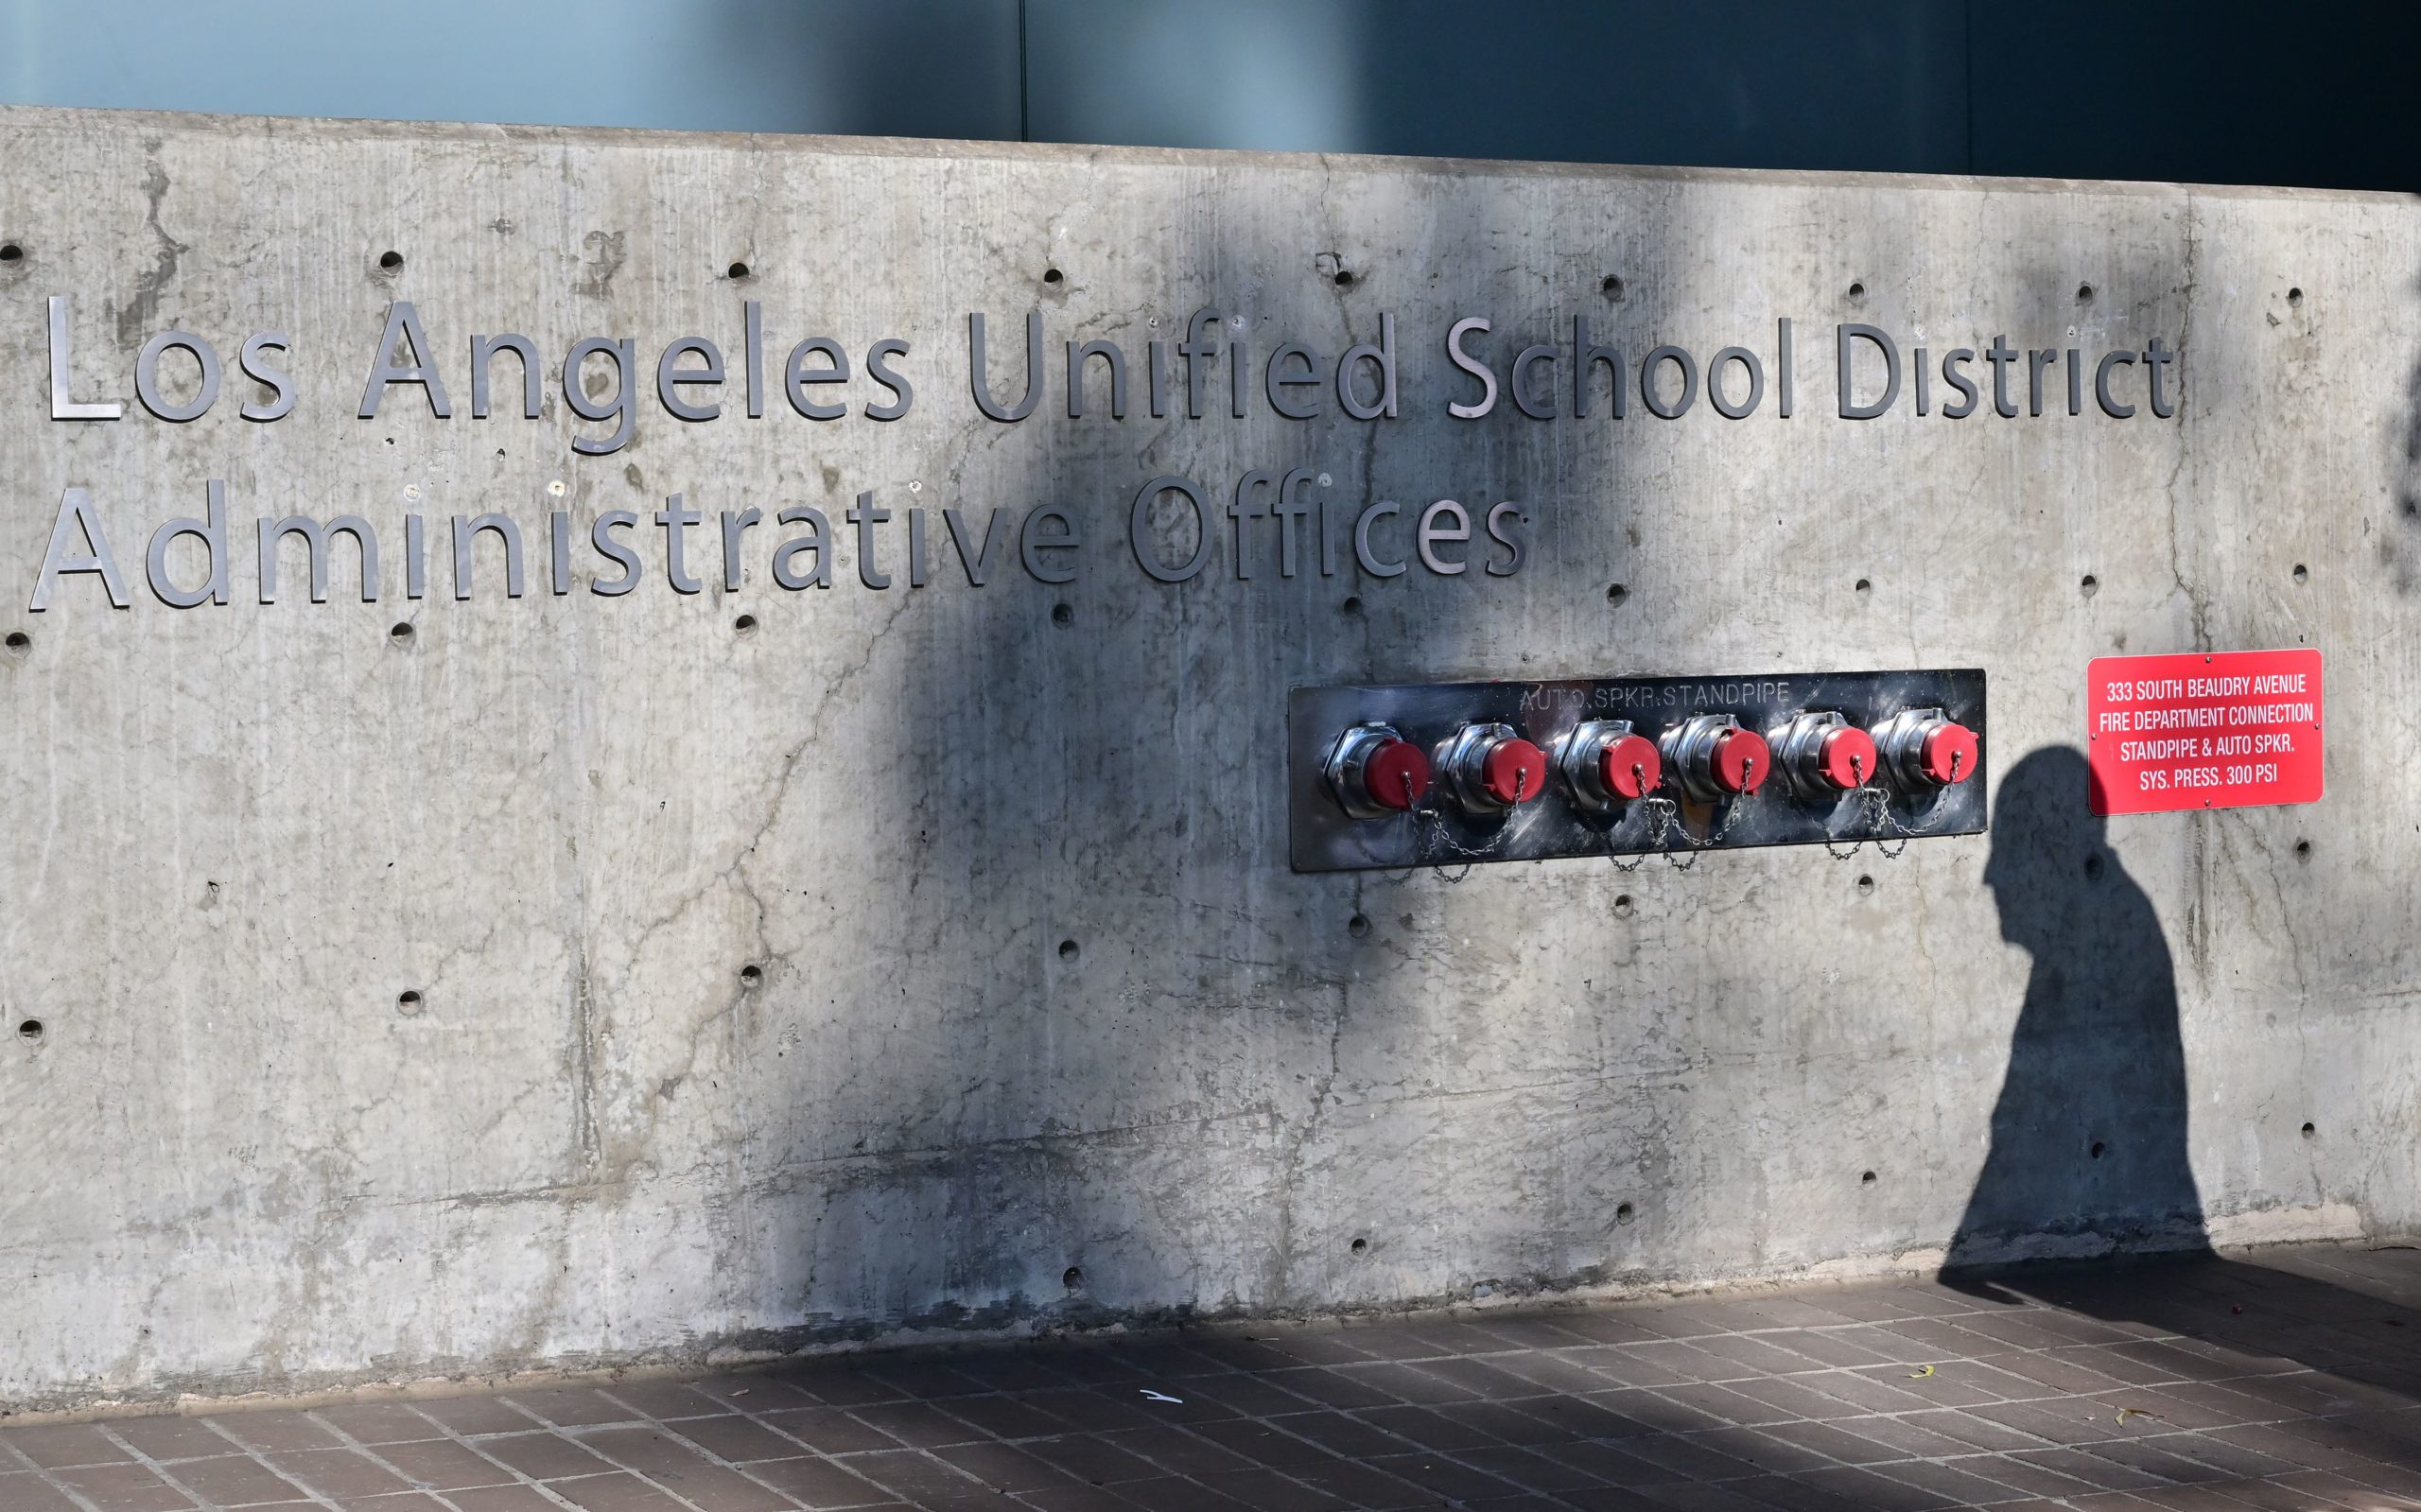 The shadow of a pedestrian is seen walking past the headquarters of the Los Angeles Unified School District on October 3, 2022 in Los Angeles, California. - LAUSD Superintendant ALberto Carvalho remains firm on Monday on his refusal to pay a ransom demanded by an international hacking syndicate, days after hacked data from the school district was posted on the dark web. A hacking syndicate known as Vice Society sent a ransom demand to the school district last week setting an October 3 deadline to pay the unspecified ransom with threats to release more hacked data online if payment is not met.(Photo by FREDERIC J. BROWN/AFP via Getty Images)